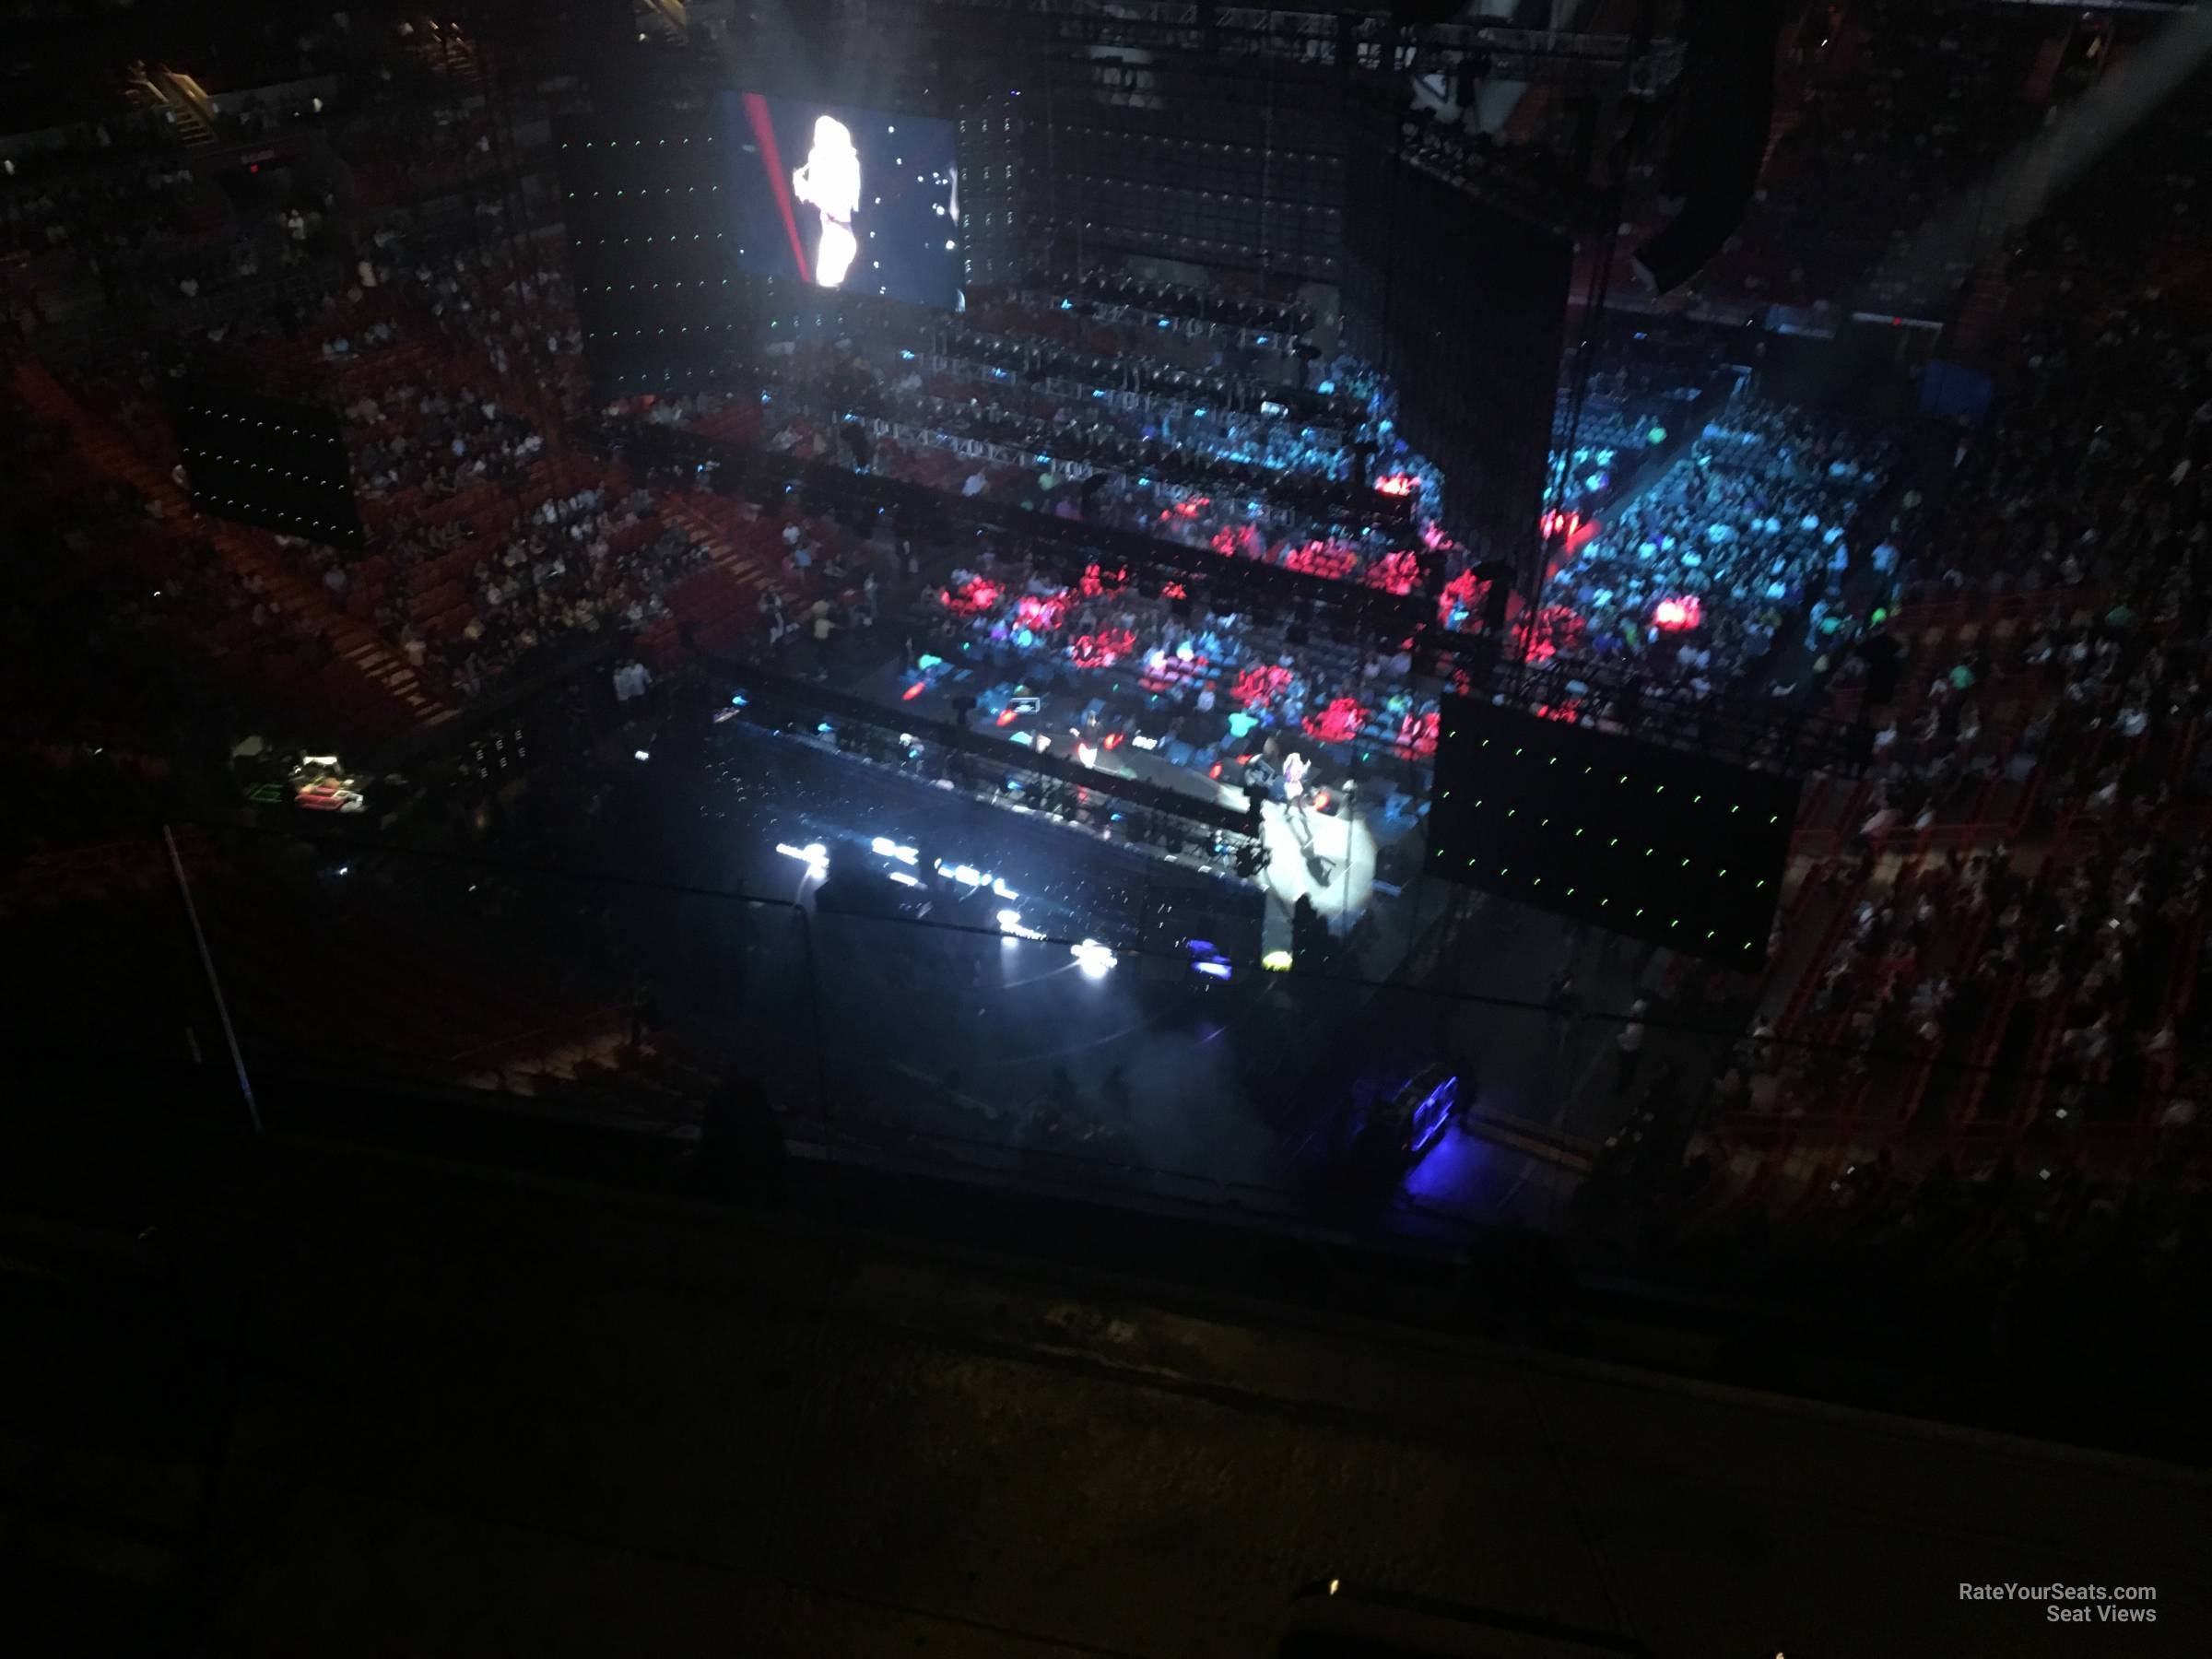 section 403, row 4 seat view  for concert - kaseya center